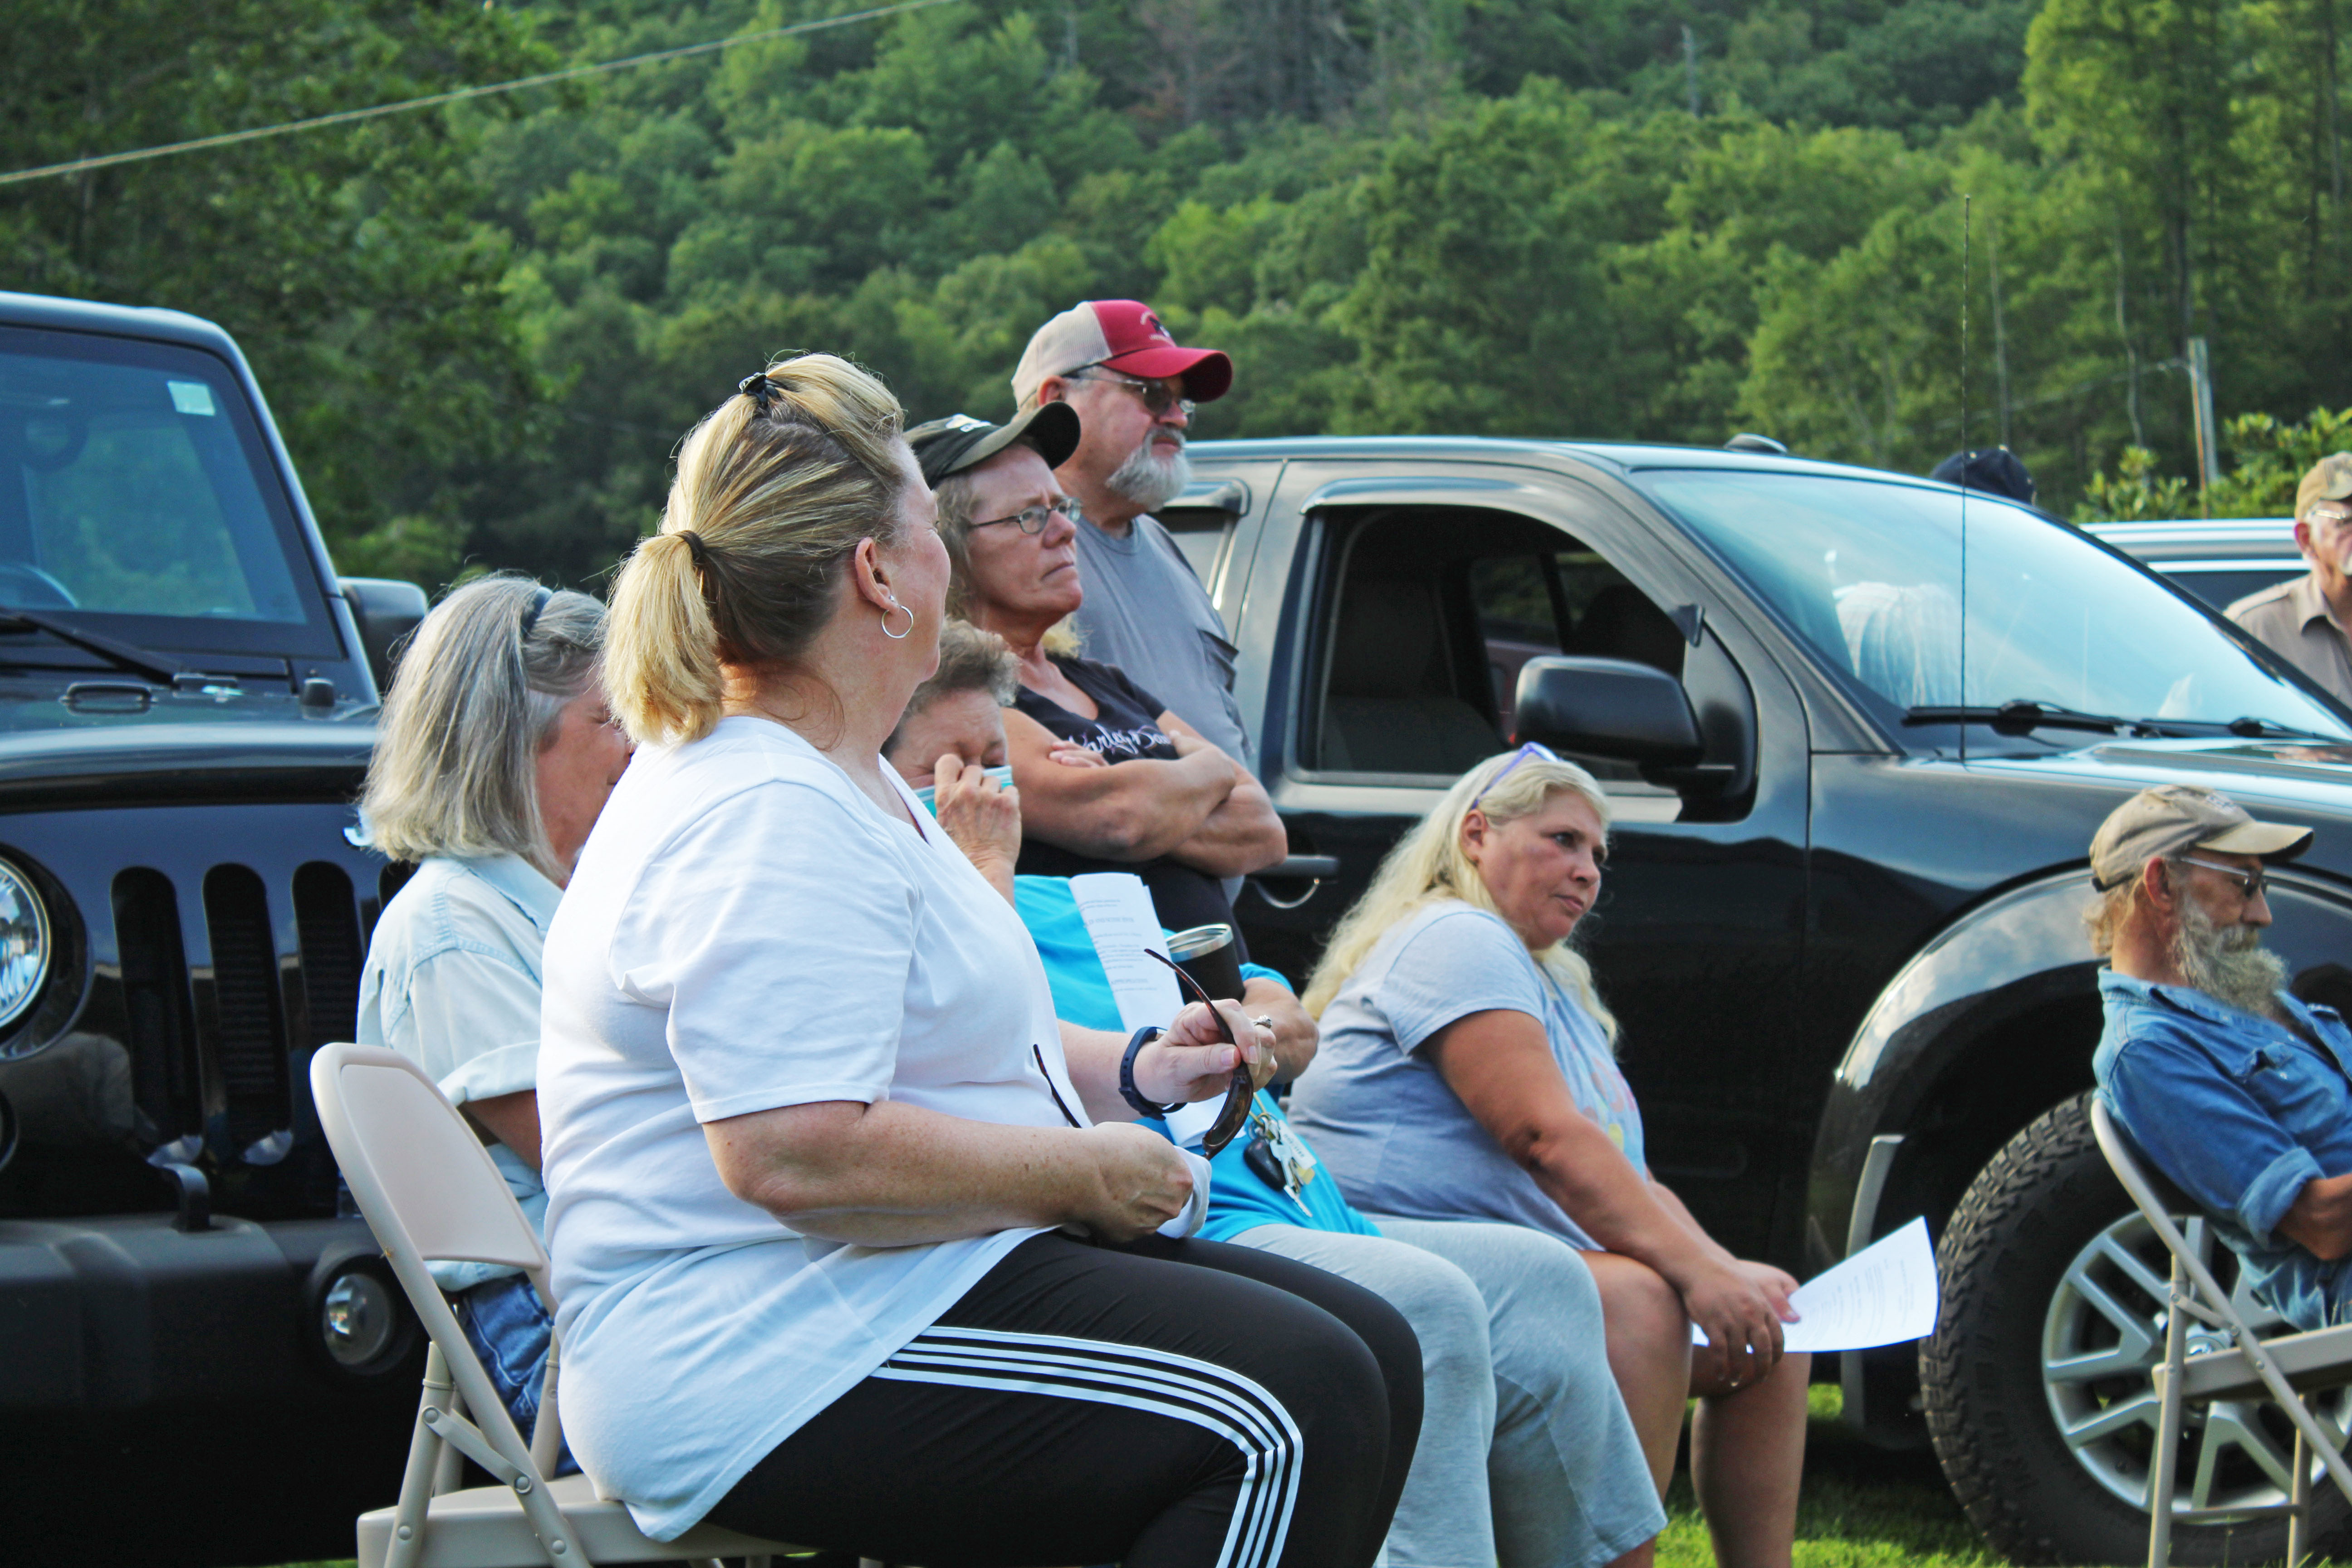 Attendees of the special commissioners meeting in Poplar listen to an address from a speaker. About 100 people showed up at the community meeting, which was held to discuss a possible designation of a portion of the Nolichucky River as a component of the National Wild and Scenic Rivers System. (MNJ Photo/Juliana Walker)